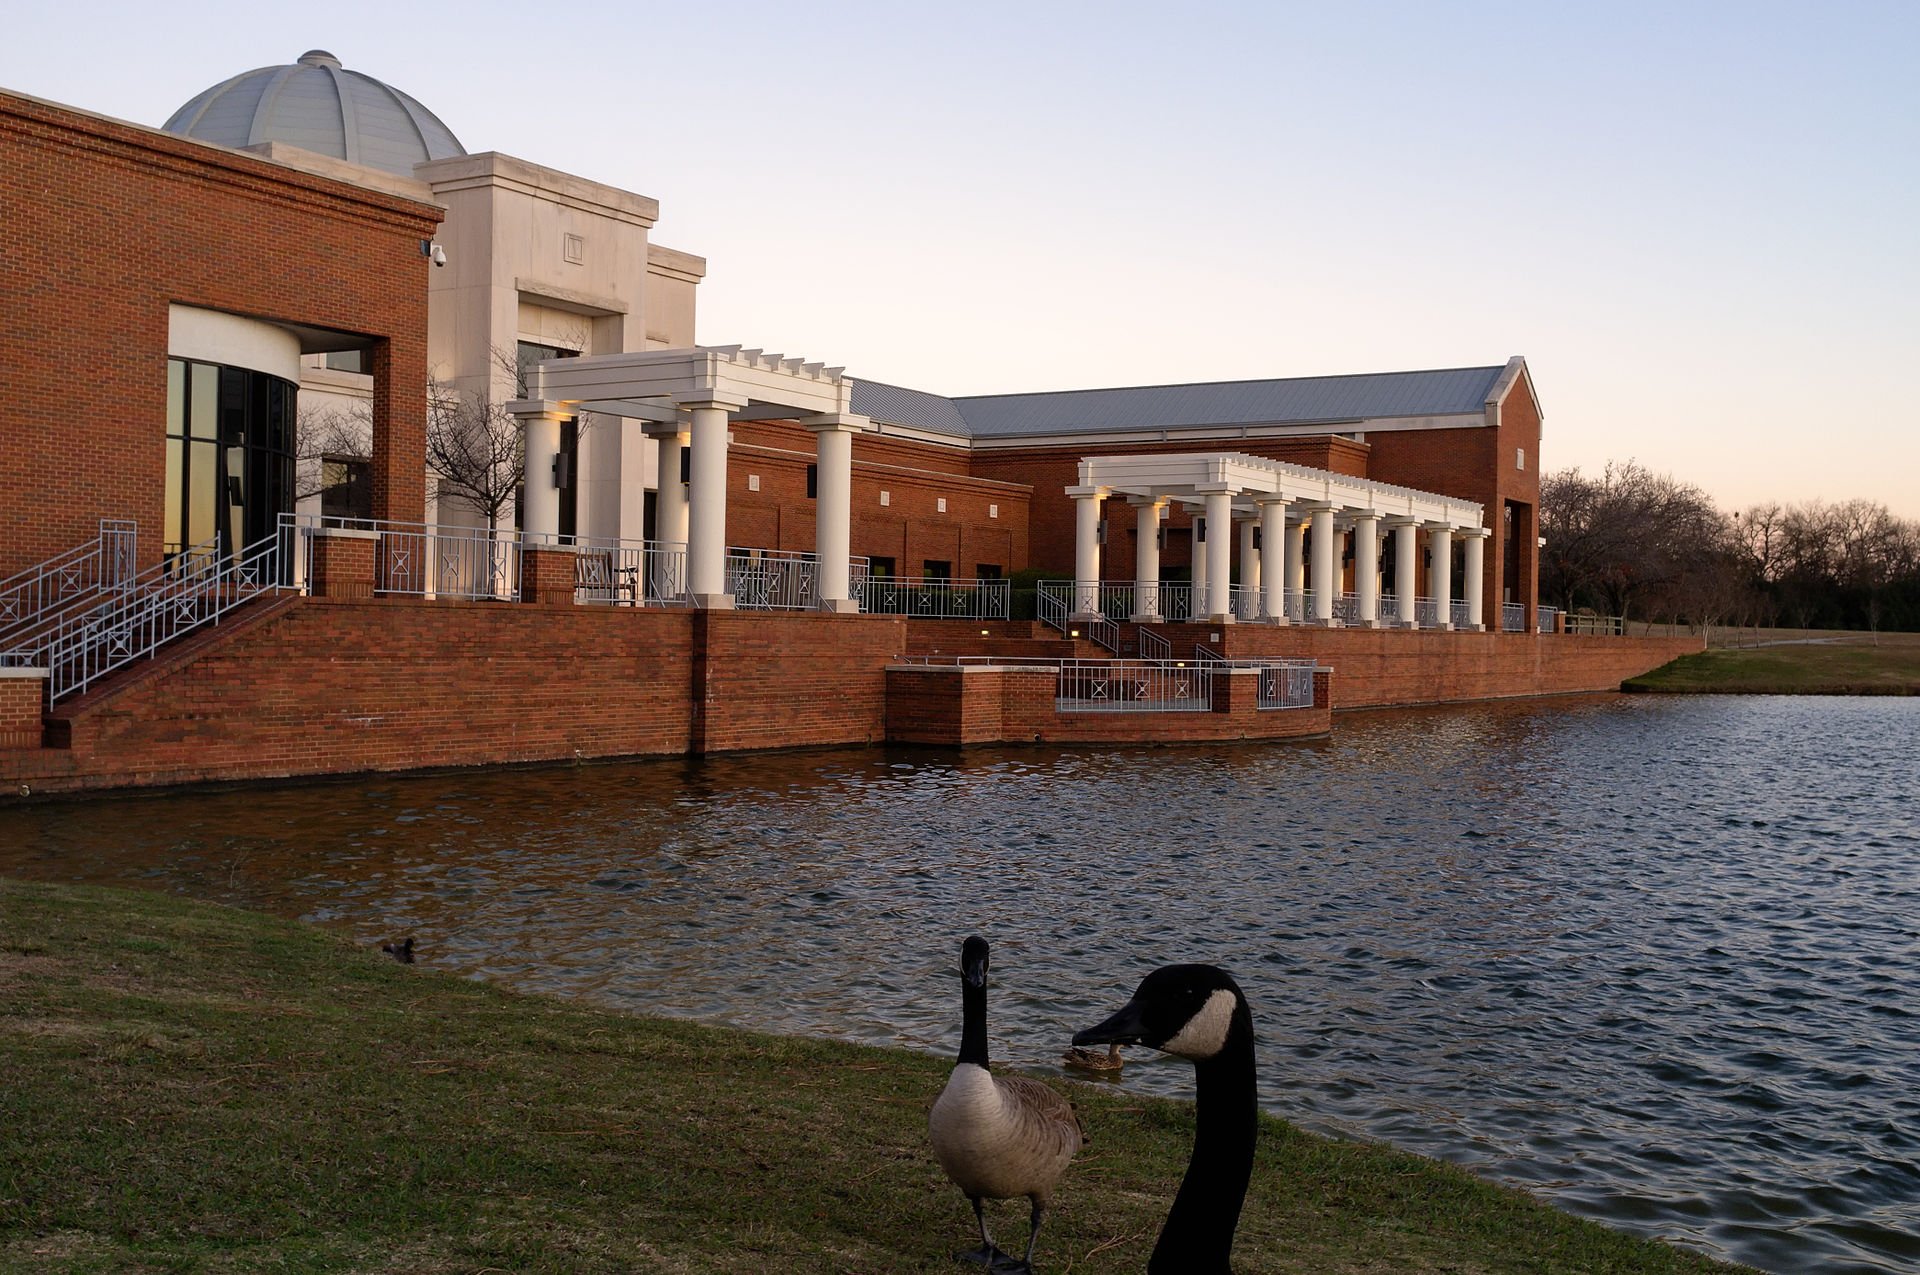 The Montgomery Museum of Fine Arts was founded in 1930 and built the facility at this location in 1988.